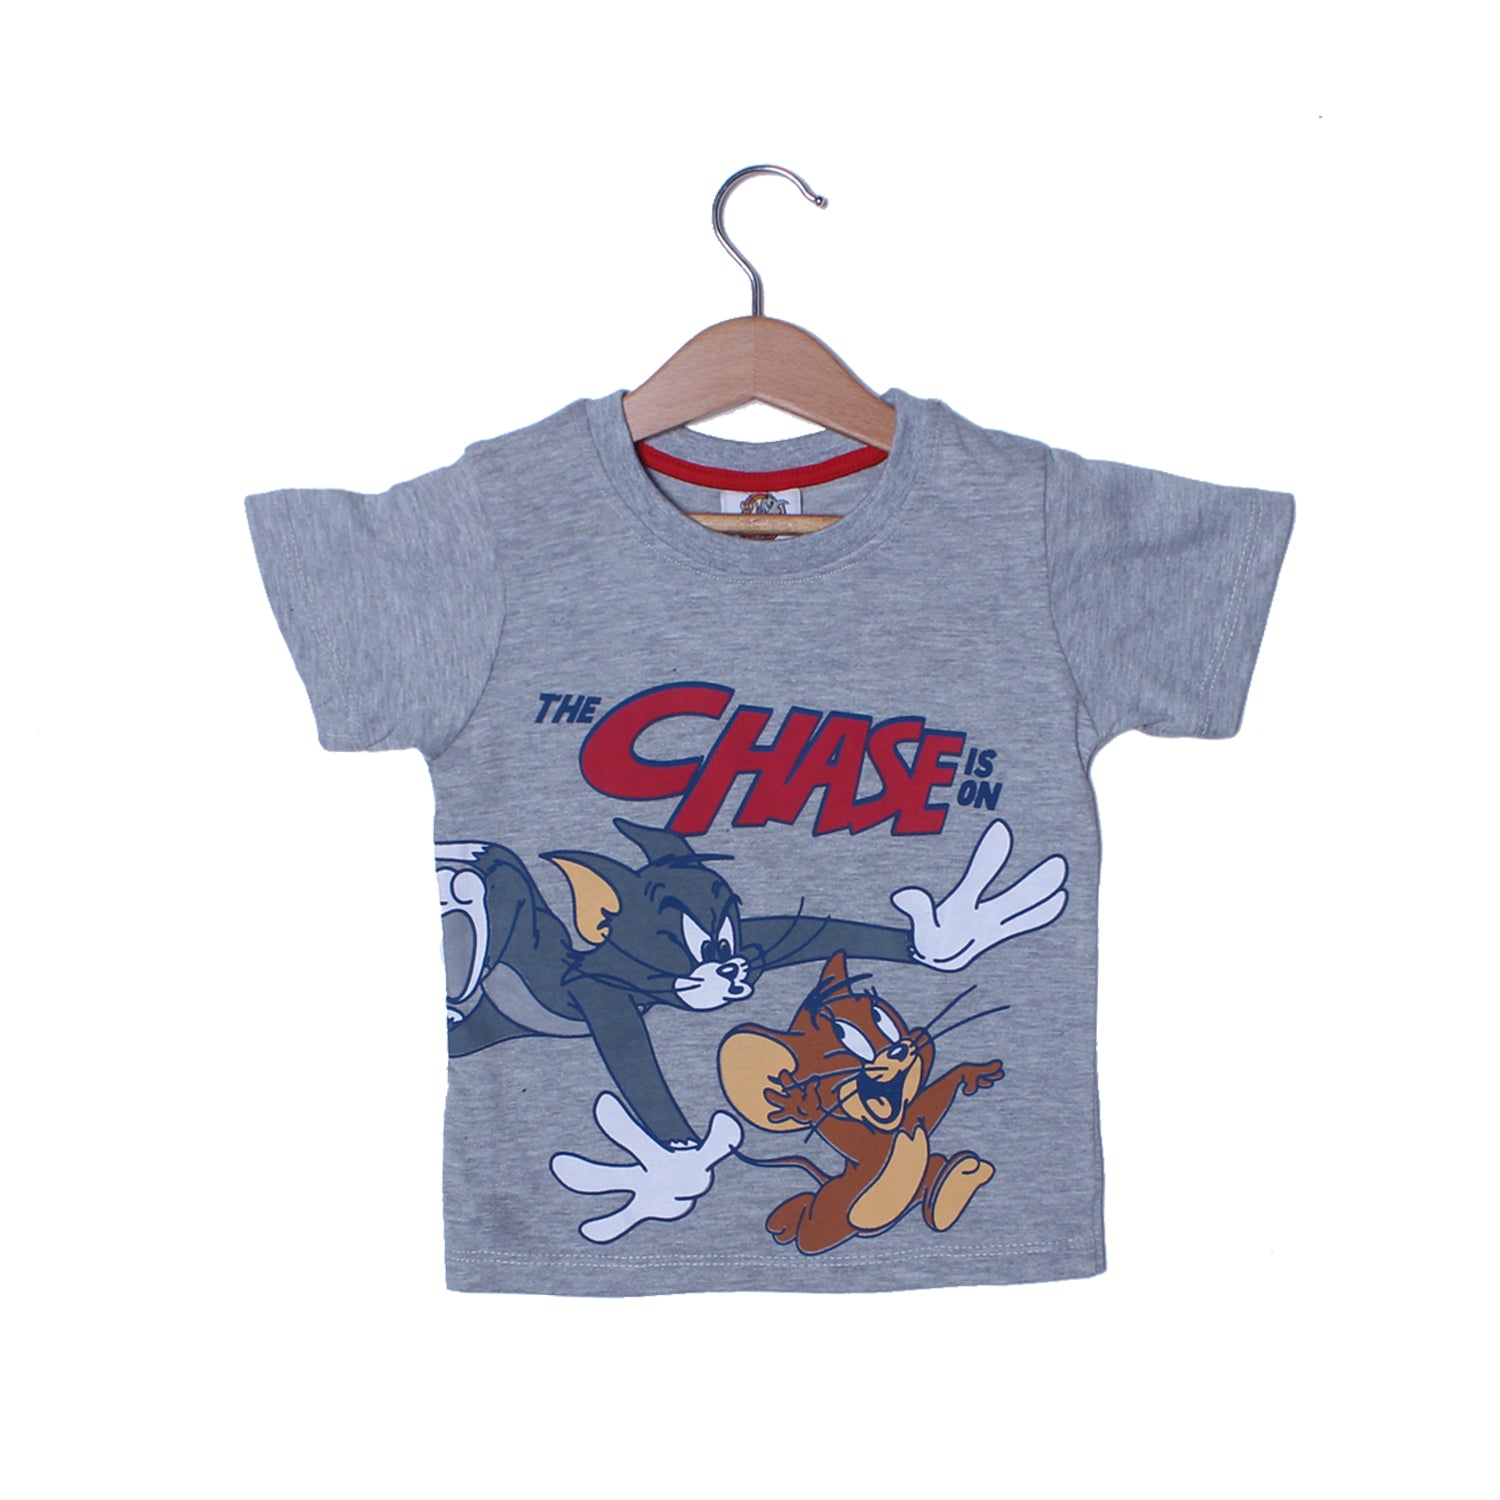 NEW GREY THE CHASE IS ON PRINTED T-SHIRT FOR BOYS